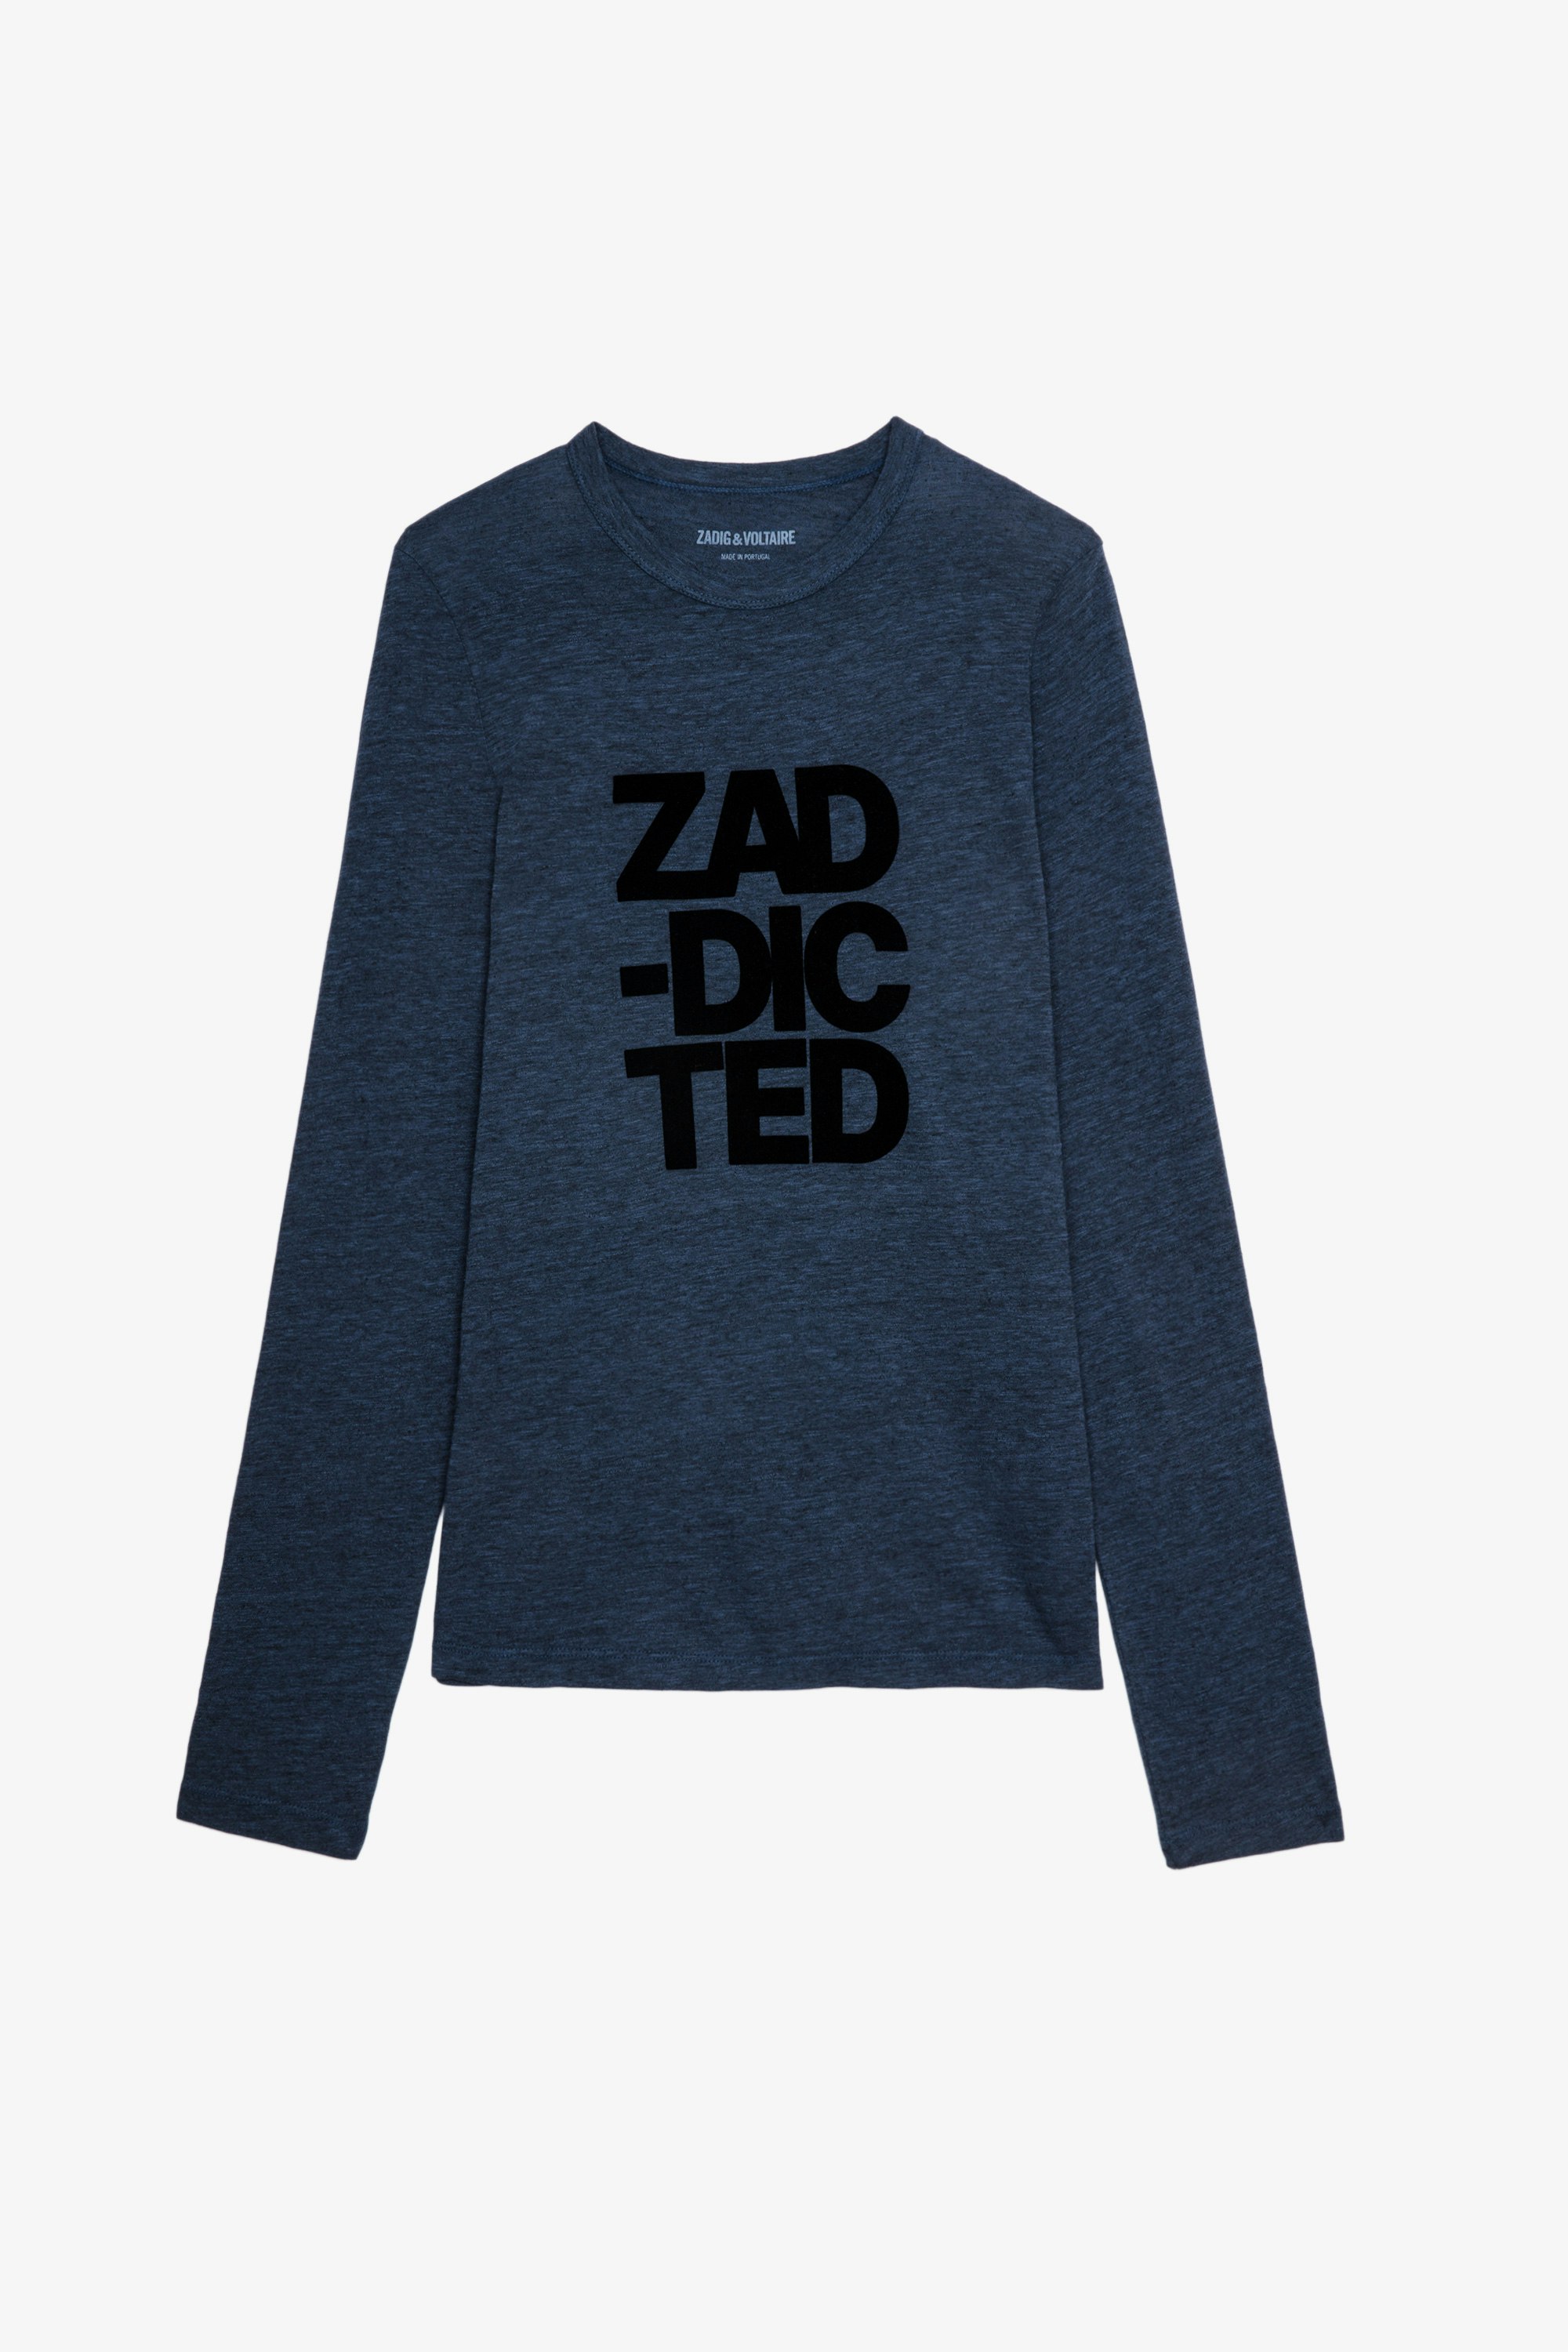 T-shirt Willy Zaddicted T-shirt blu con applicazione zaddicted donna